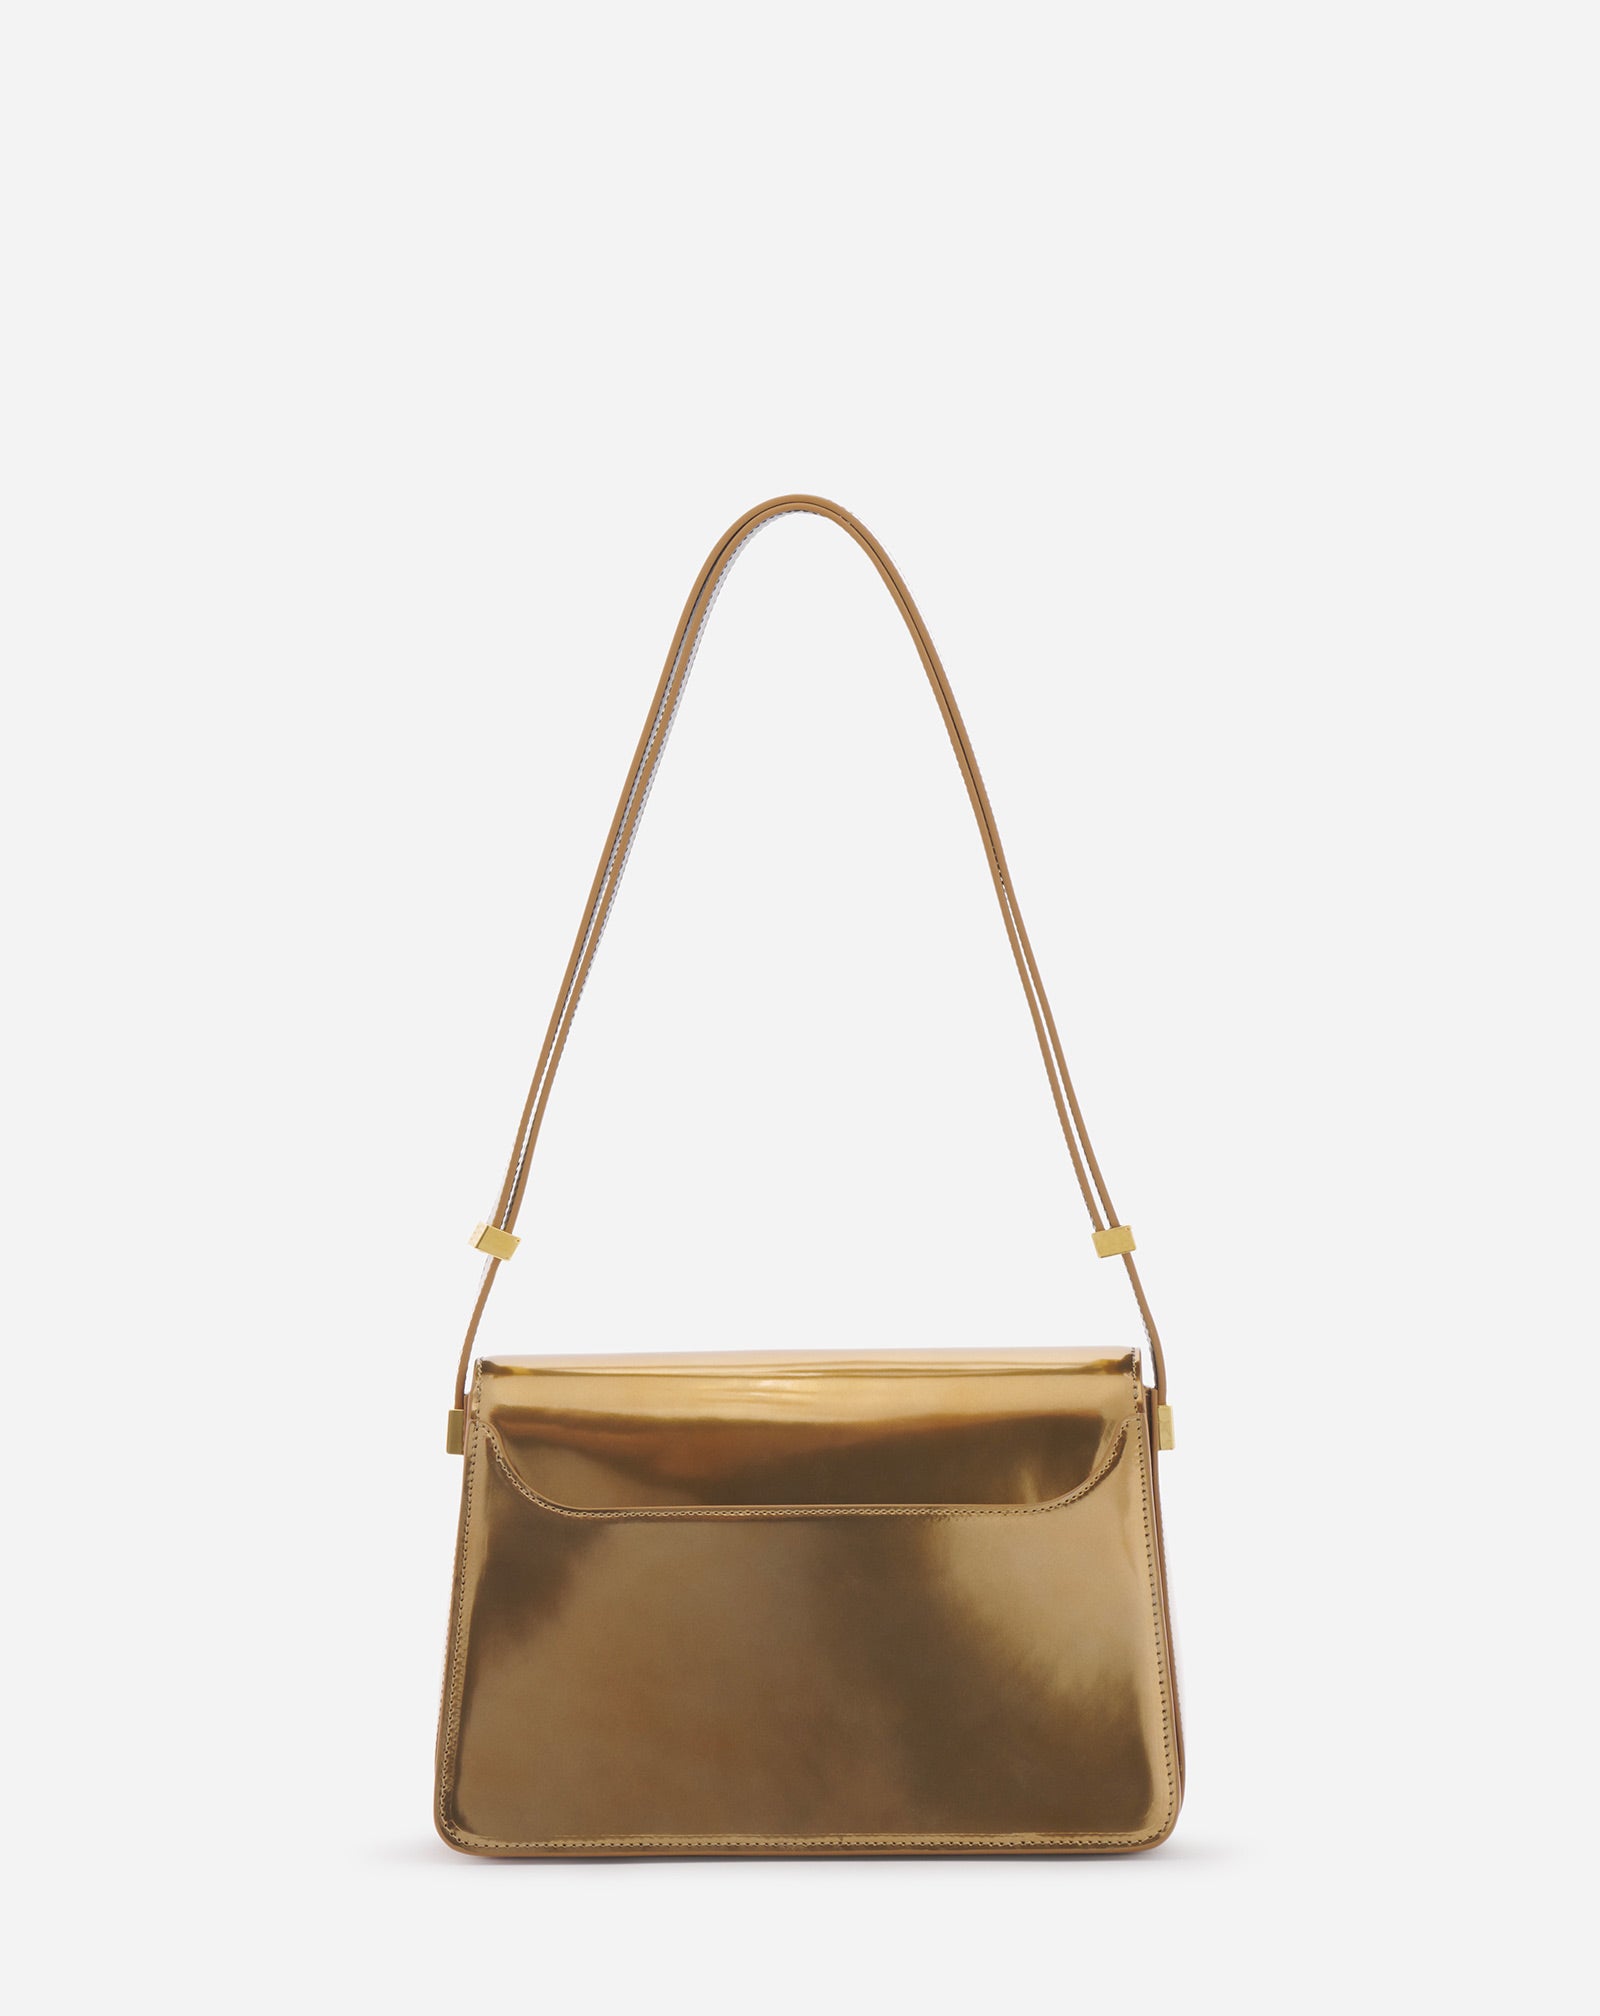 SMALL CONCERTO BAG IN METALLIC LEATHER